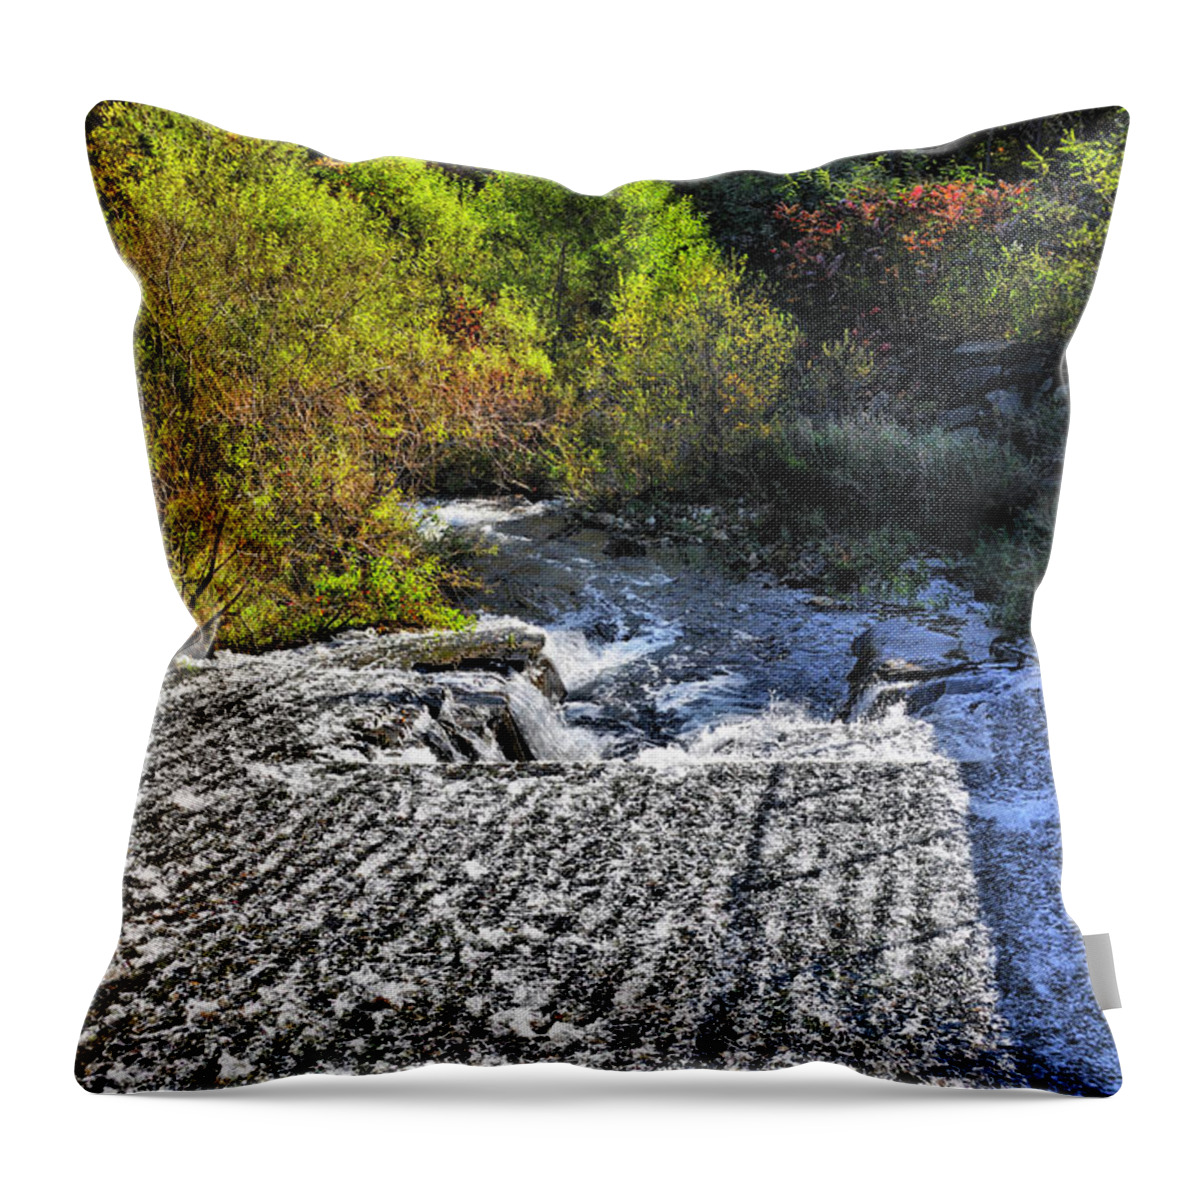 Autumn Throw Pillow featuring the photograph Turning Leaves Flowing Water by Luke Moore